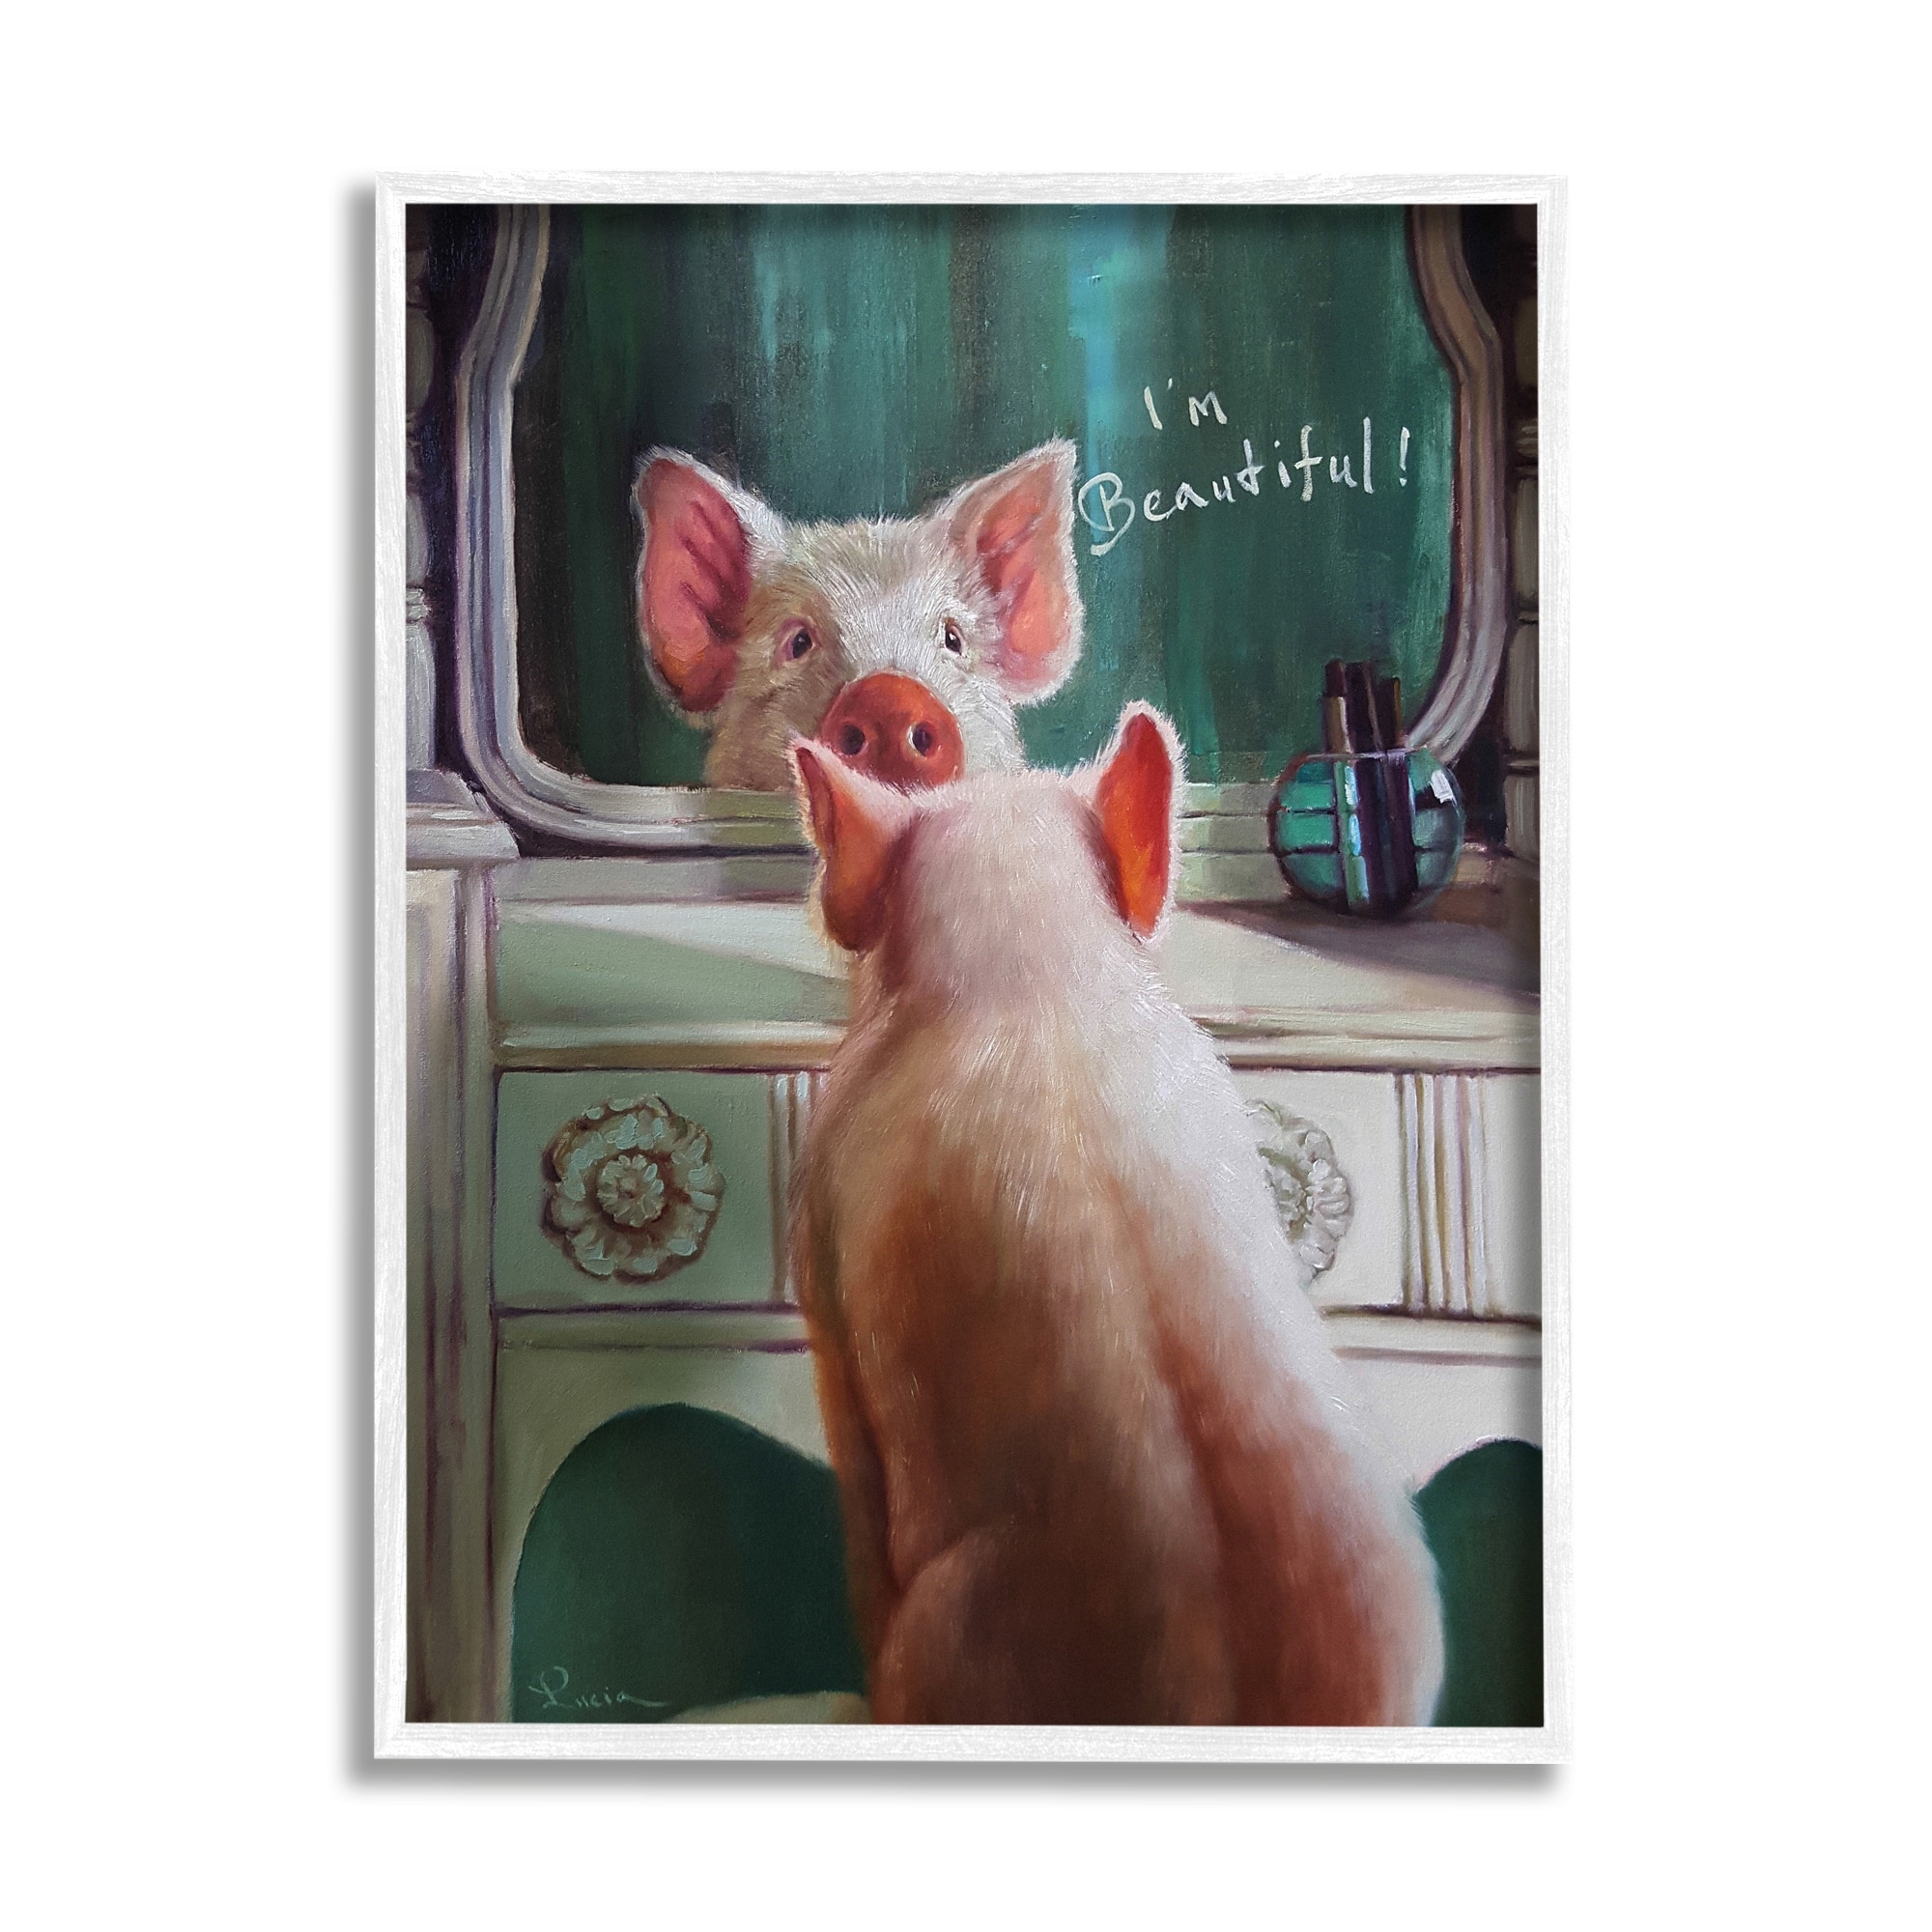 I'm Beautiful Painted Pig in Mirror Illustration Framed Wall Art - Bed ...